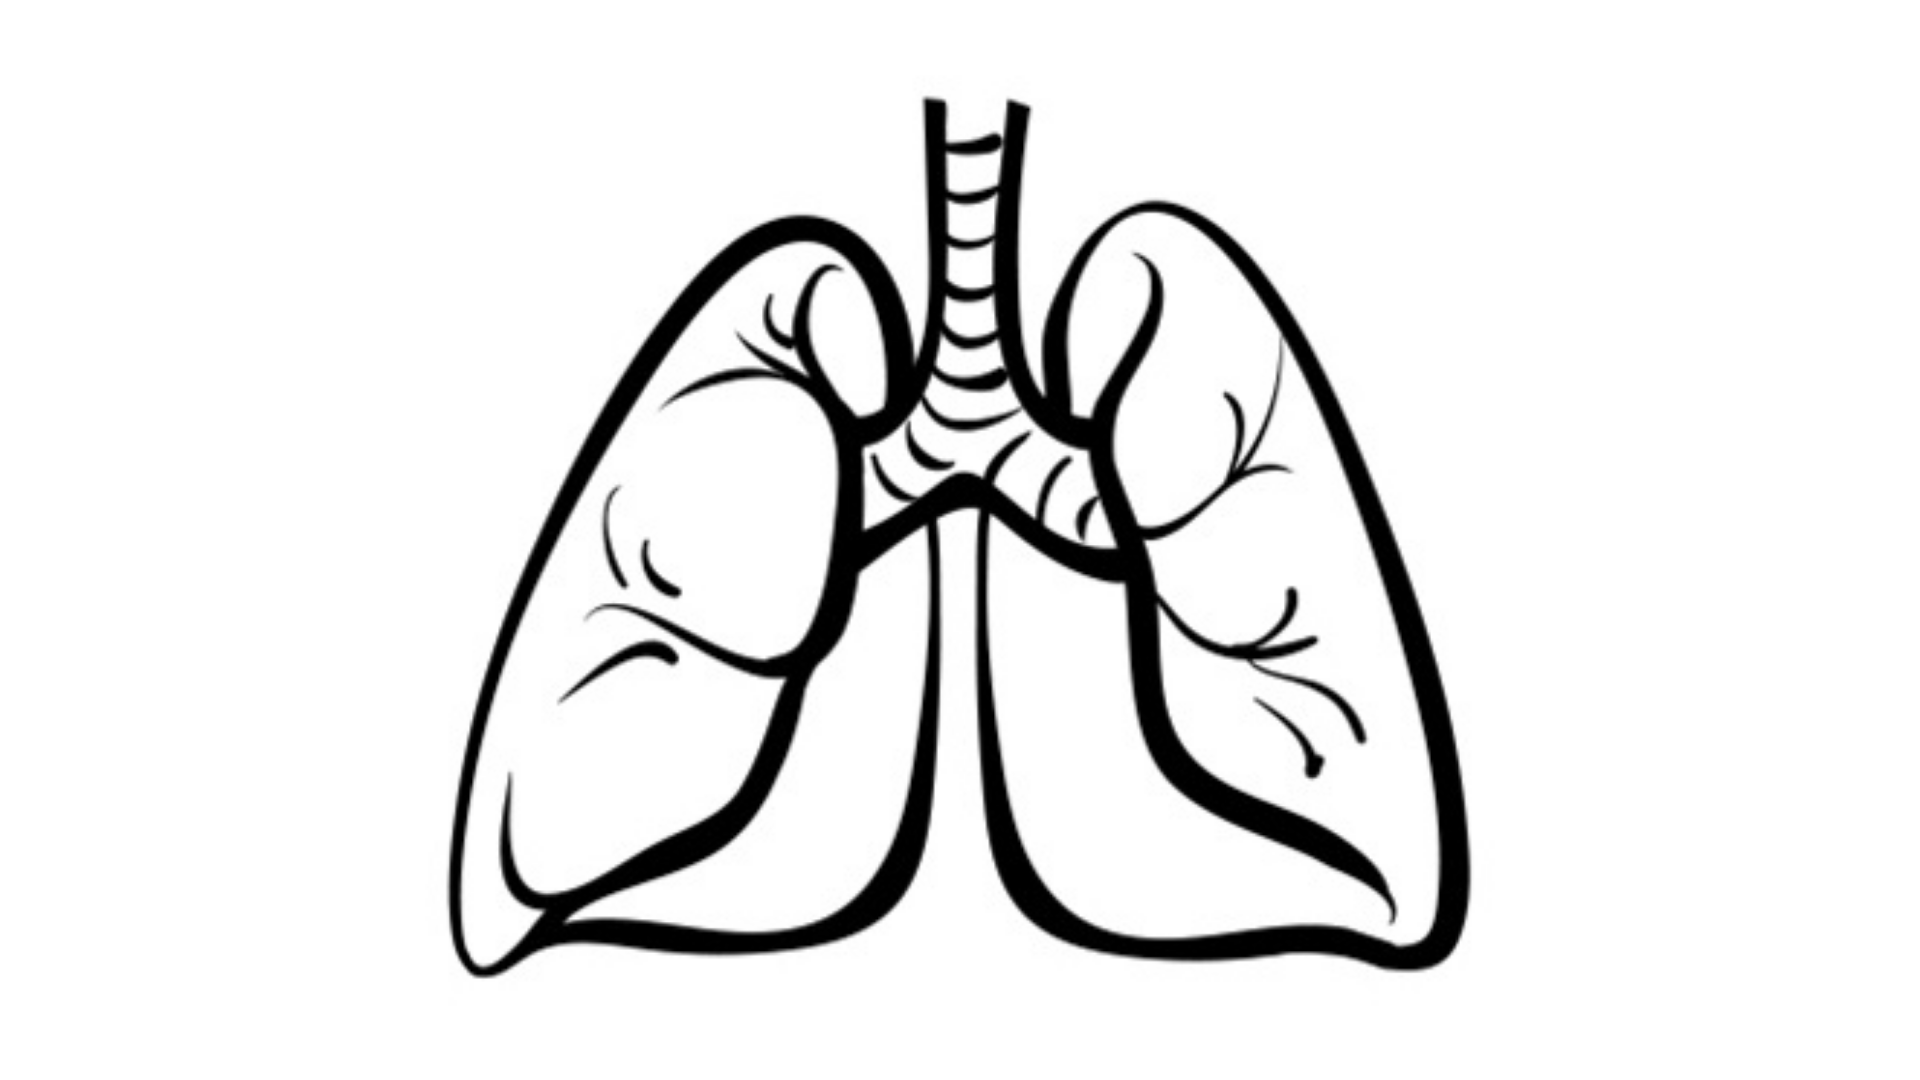 How to Draw Lungs - Step 6 | Lungs drawing, Drawing lessons for kids, Step  by step drawing